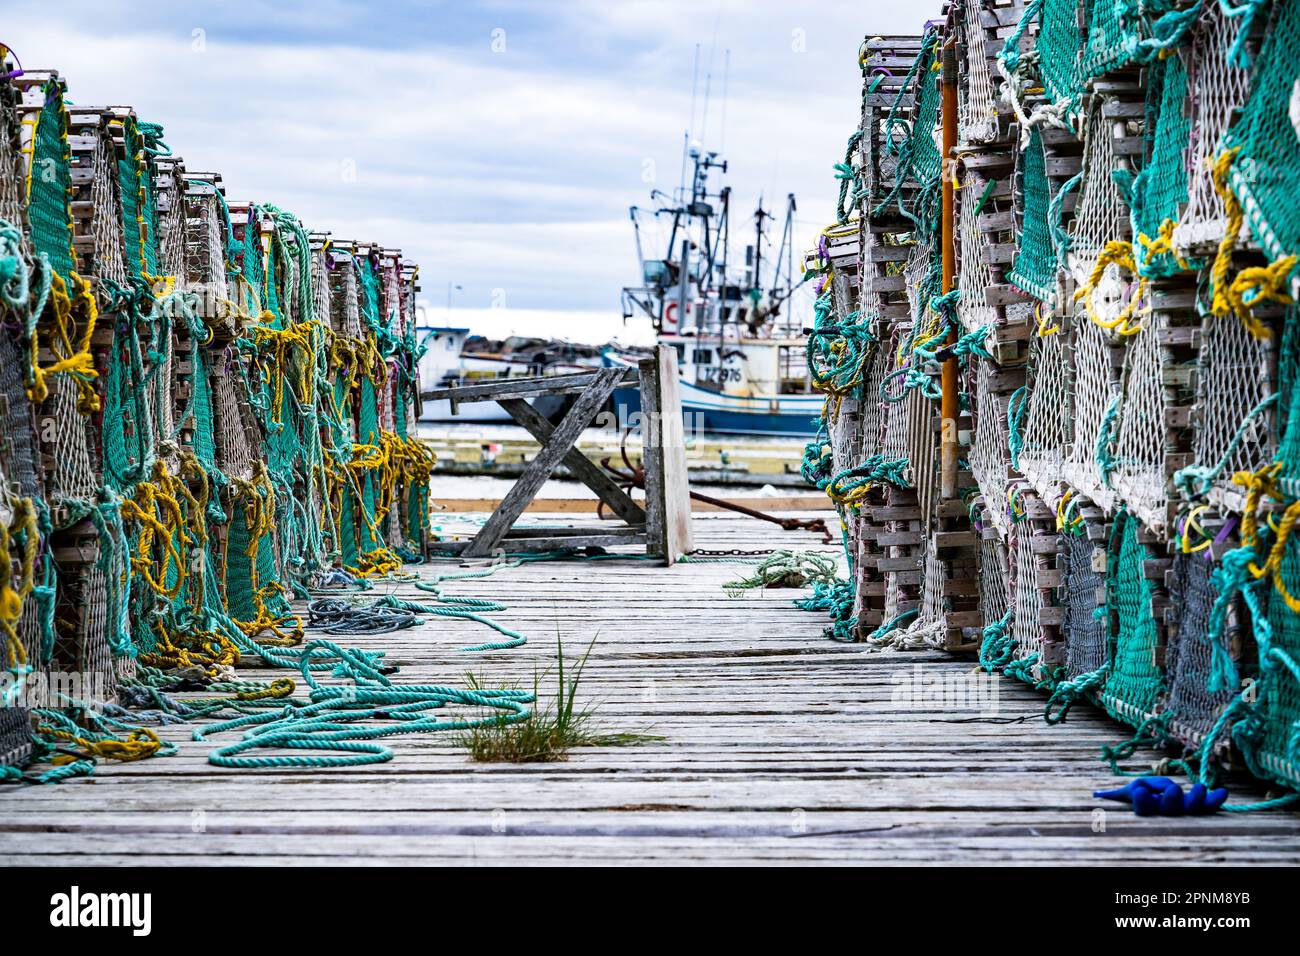 Wooden lobster traps stacked in rows on an old dock with colourful ropes overlooking a harbour with fishing boats in Whiteway Newfoundland Canada Stock Photo